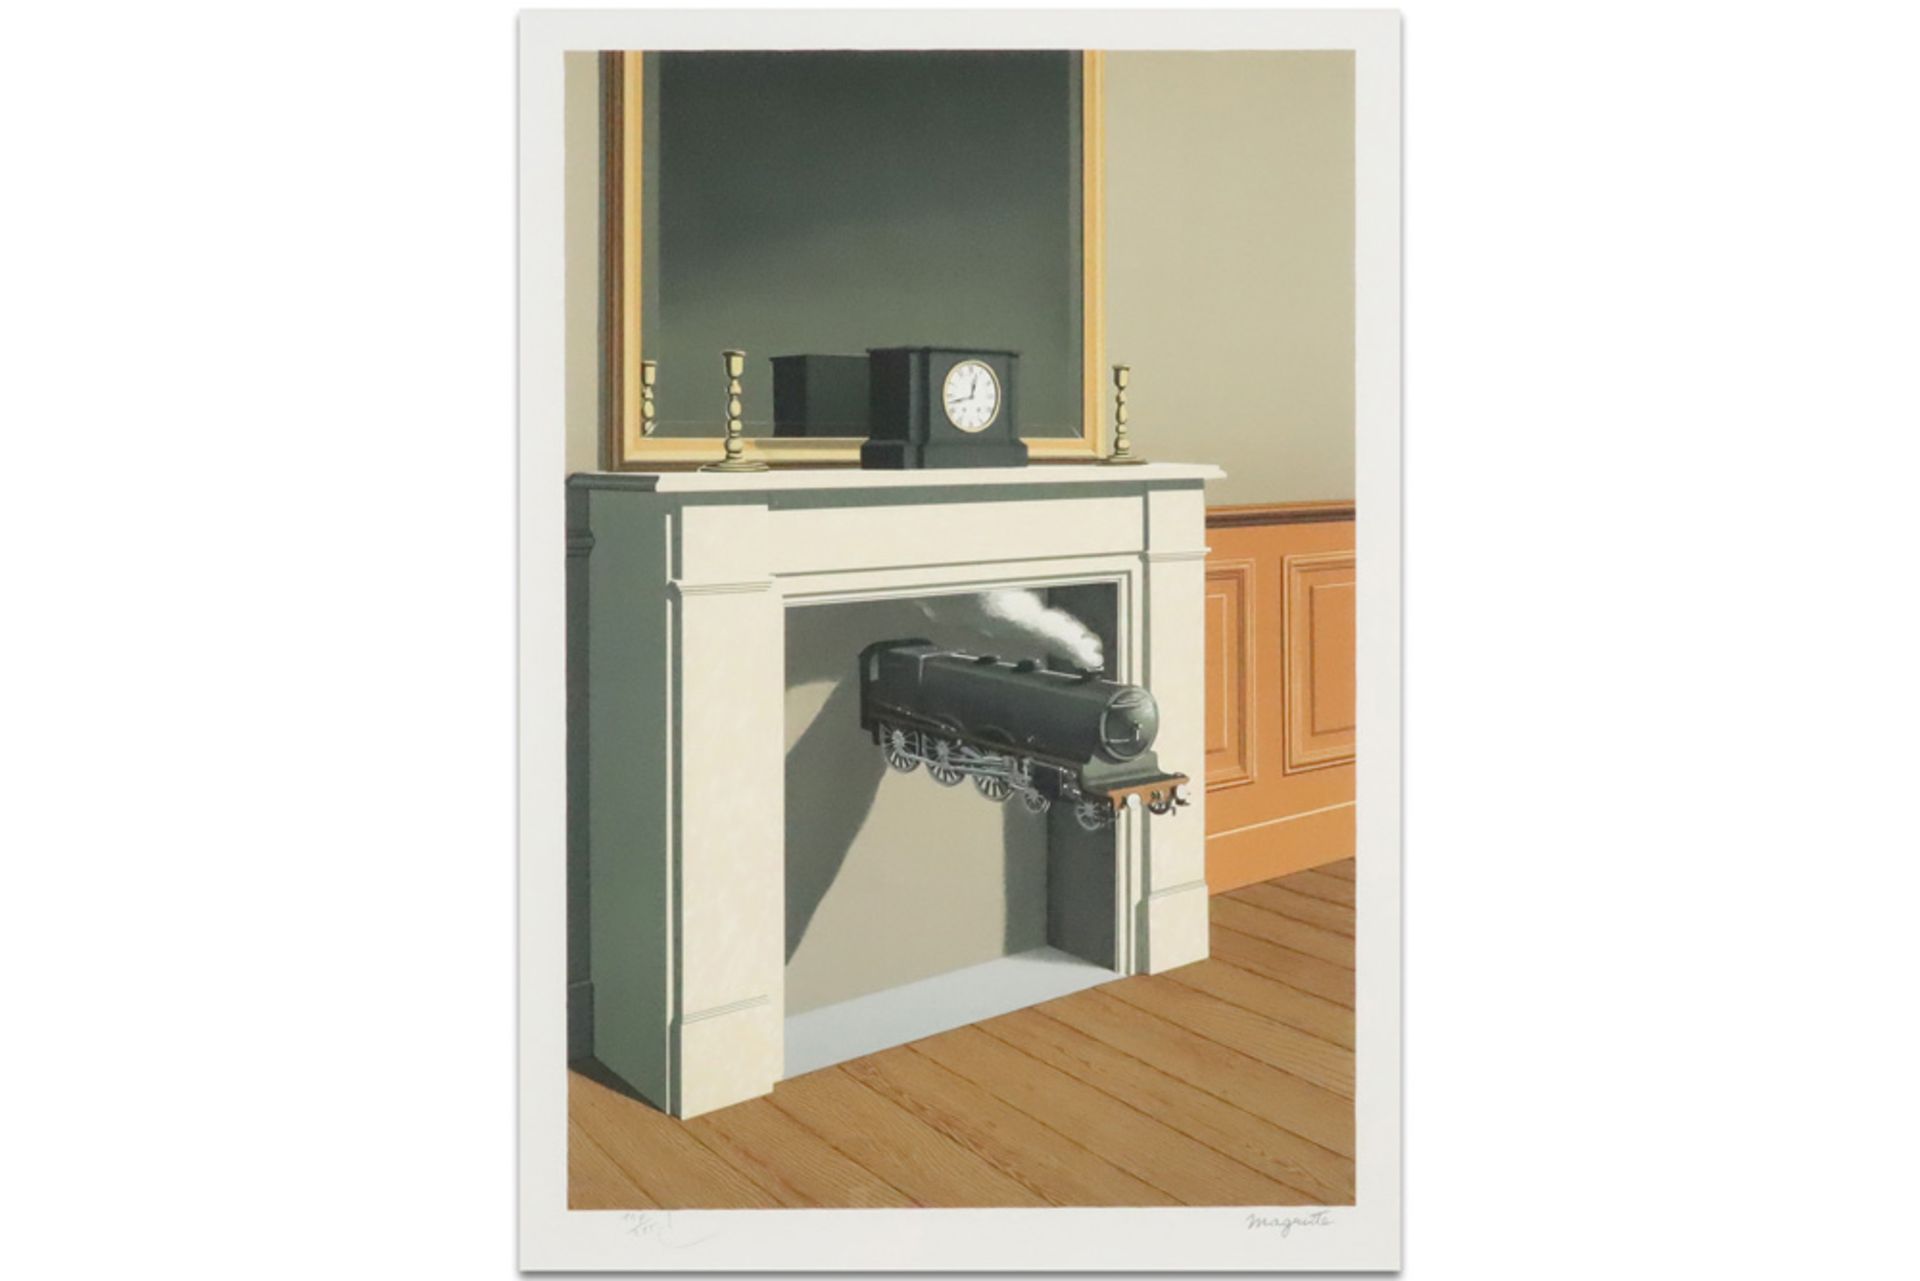 lithograph printed in colors after René Magritte's "La durée poignardée" - signed in the print and